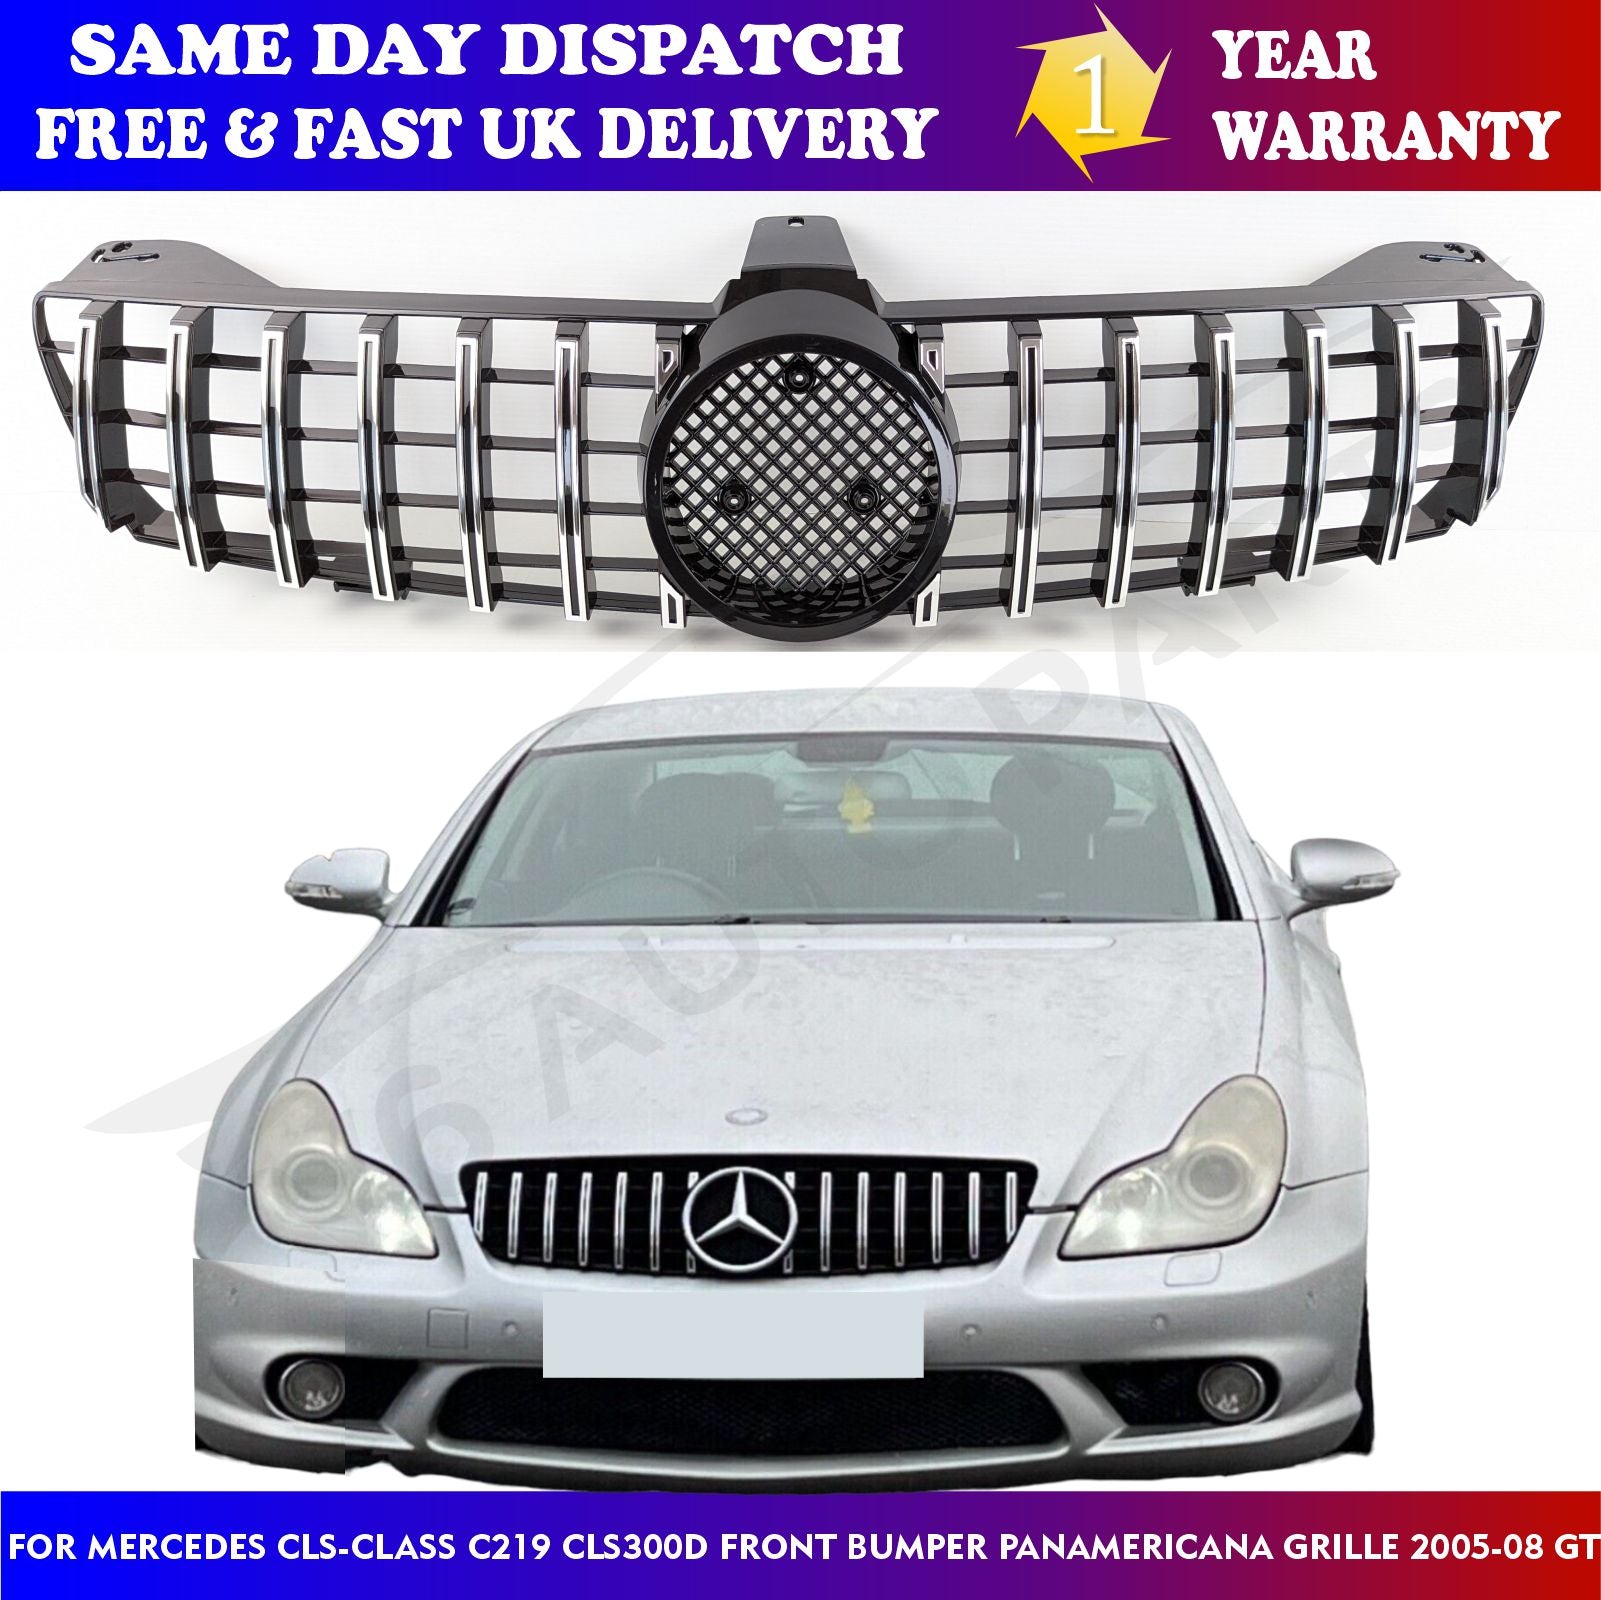 For Mercedes CLS-Class W219 GT Front Bumper Chrome Grille 2005-2008 Panamericana